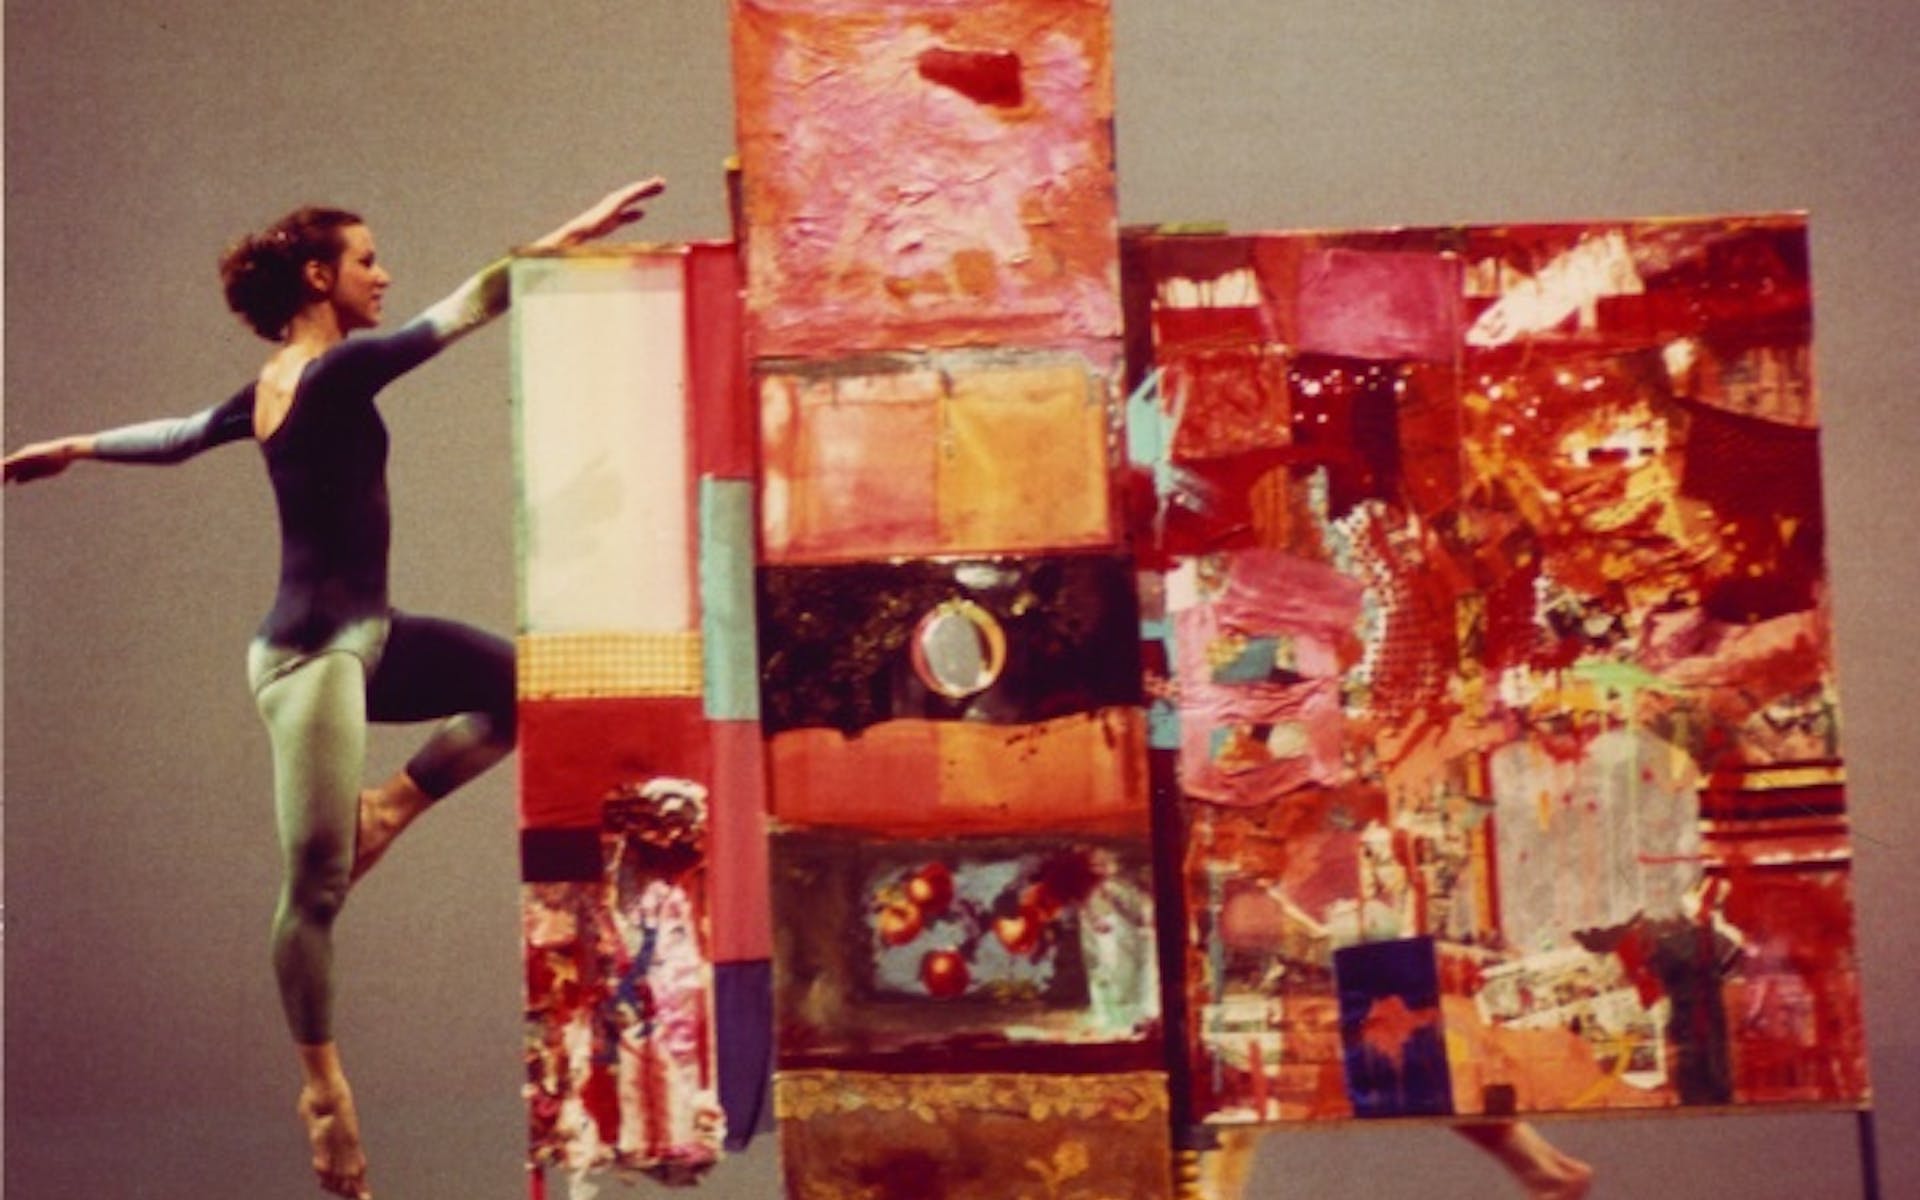 Merce Cunningham Dance Company performing Minutiae (1954) against the backdrop of Rauschenberg’s work of the same name